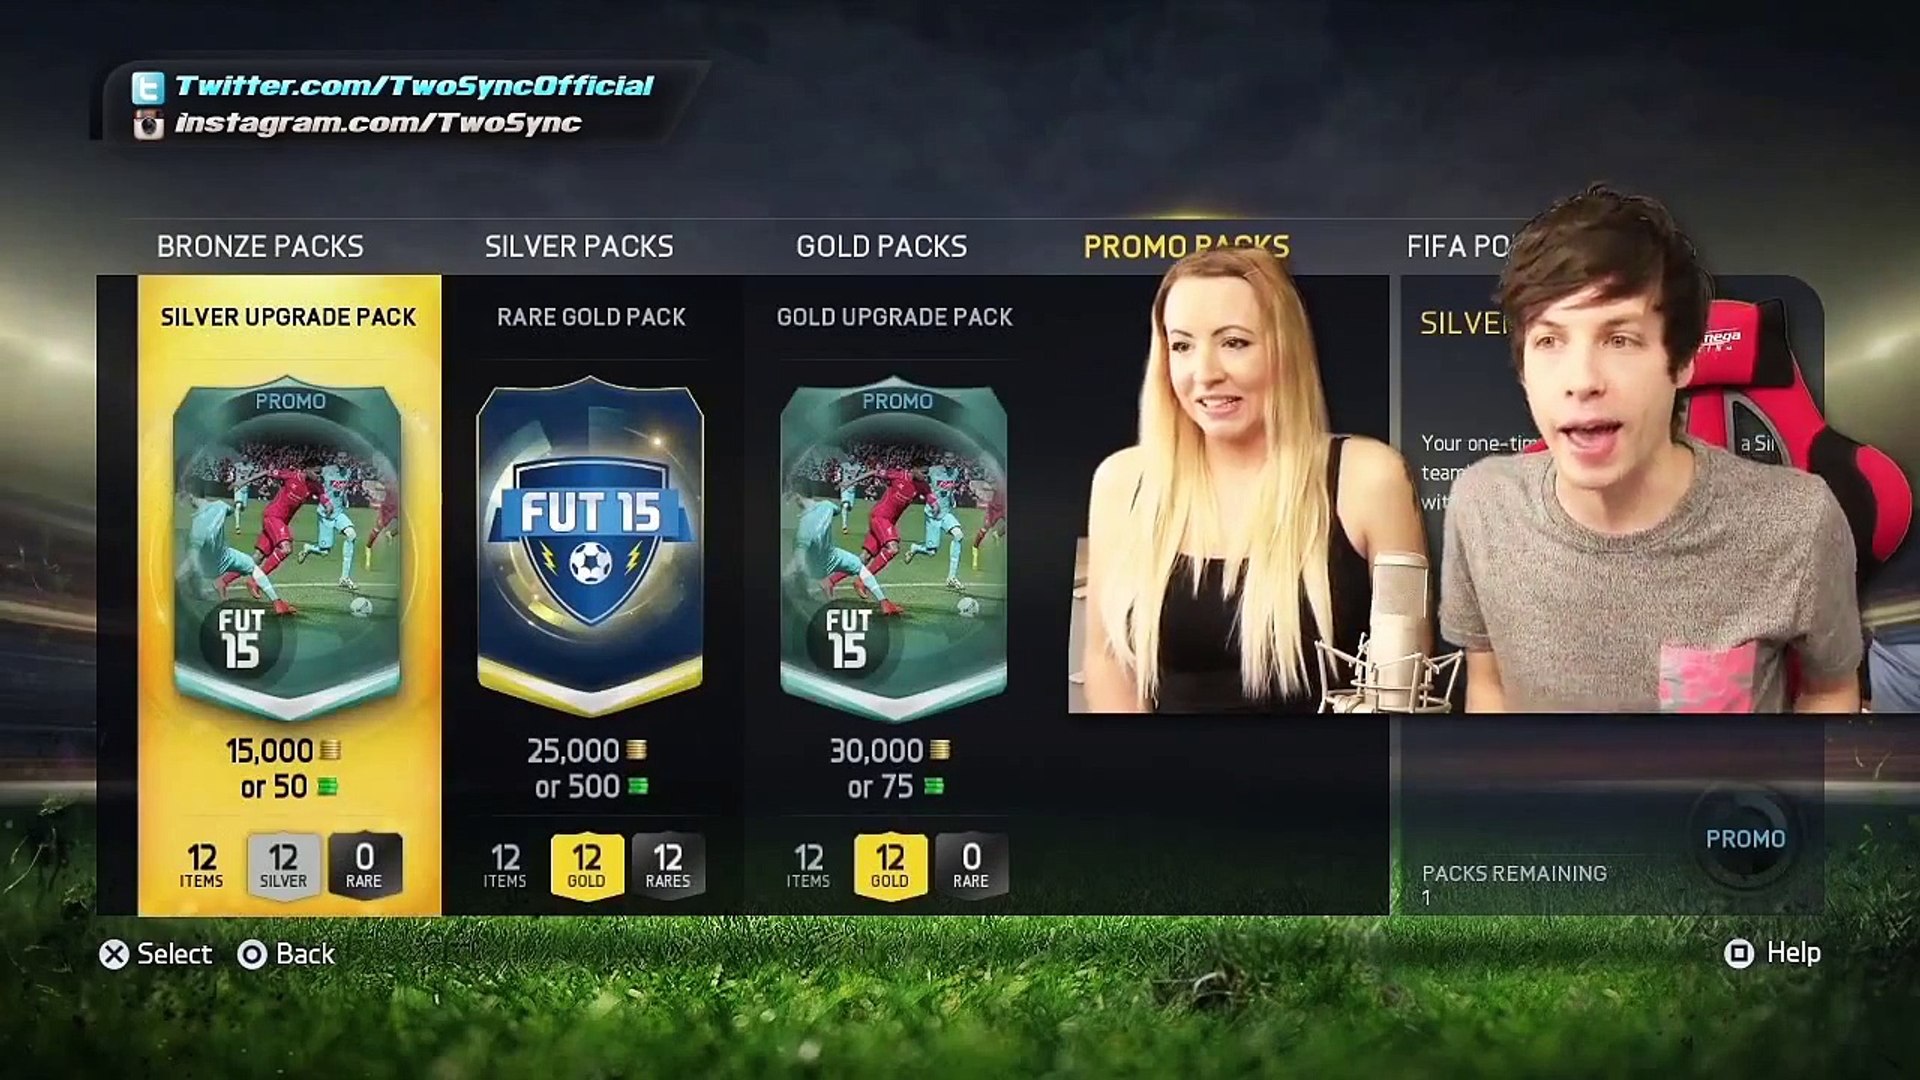 TOTS RONALDO PACKED BY OUR SISTER!! FIFA 15 PACK OPENING #TWOSYNC - video  Dailymotion